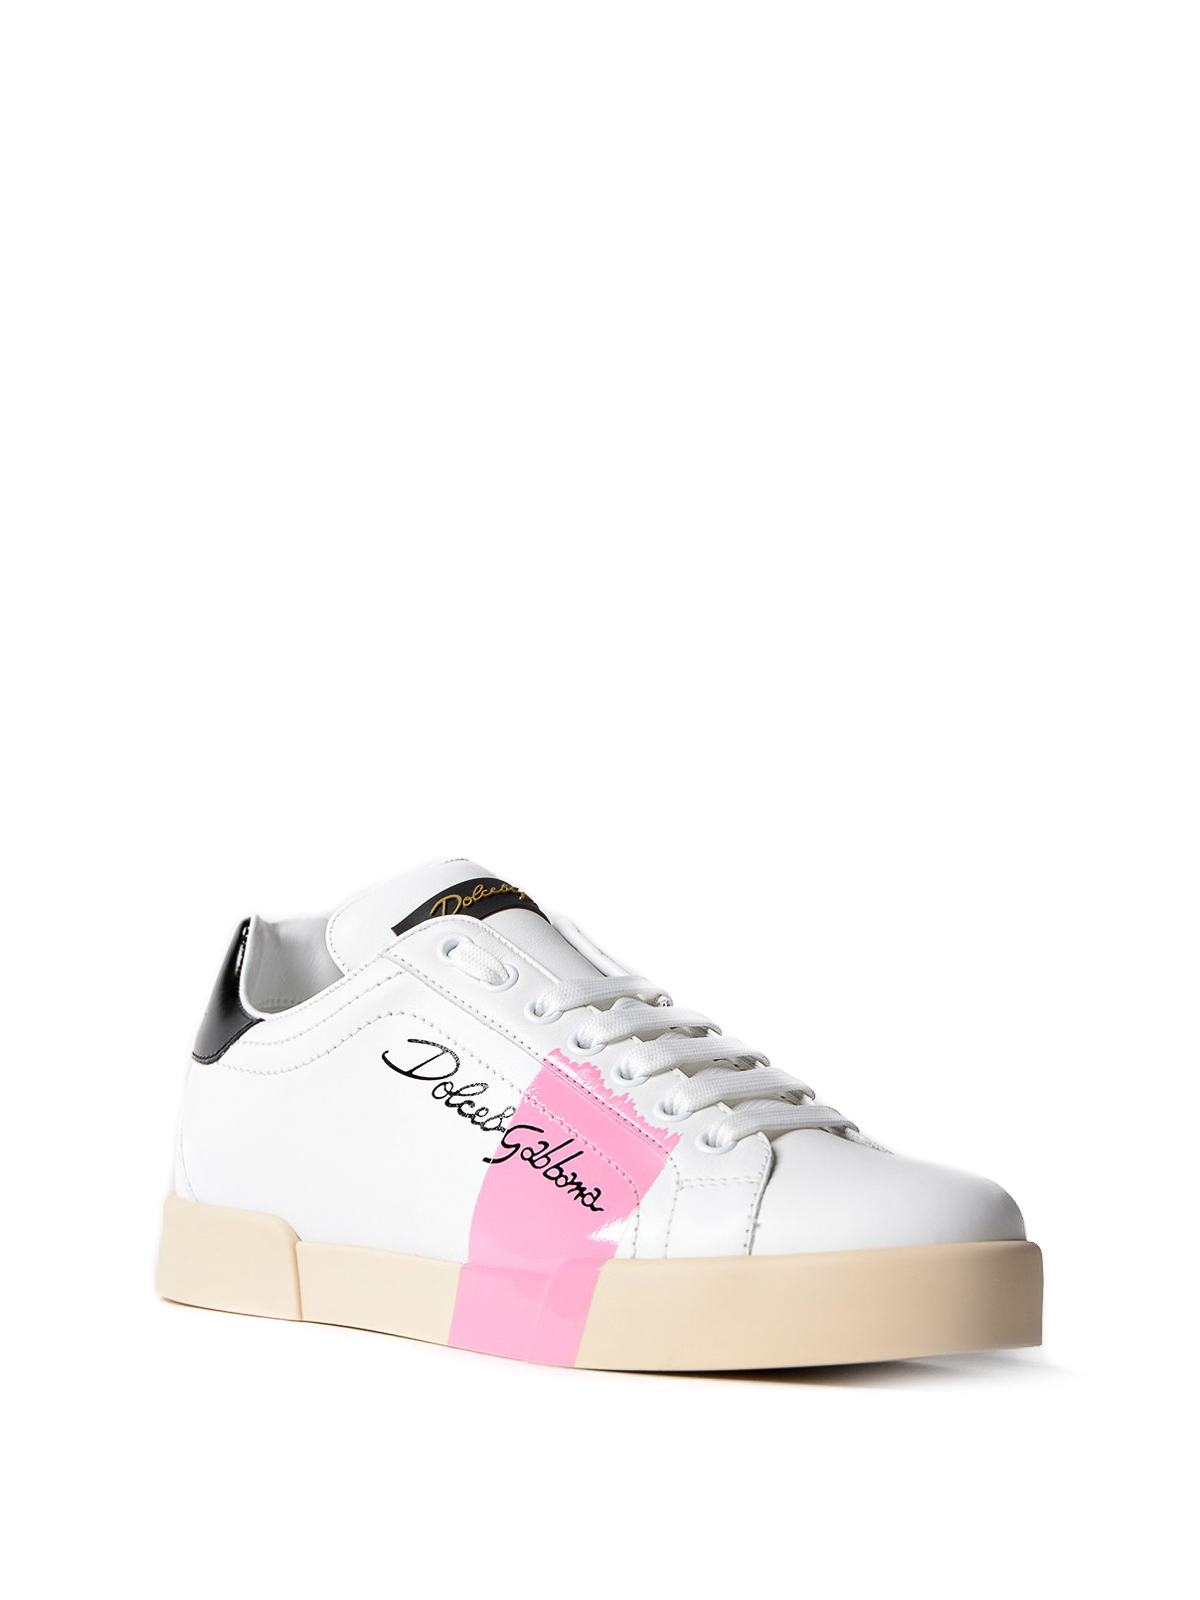 dolce and gabbana trainers pink